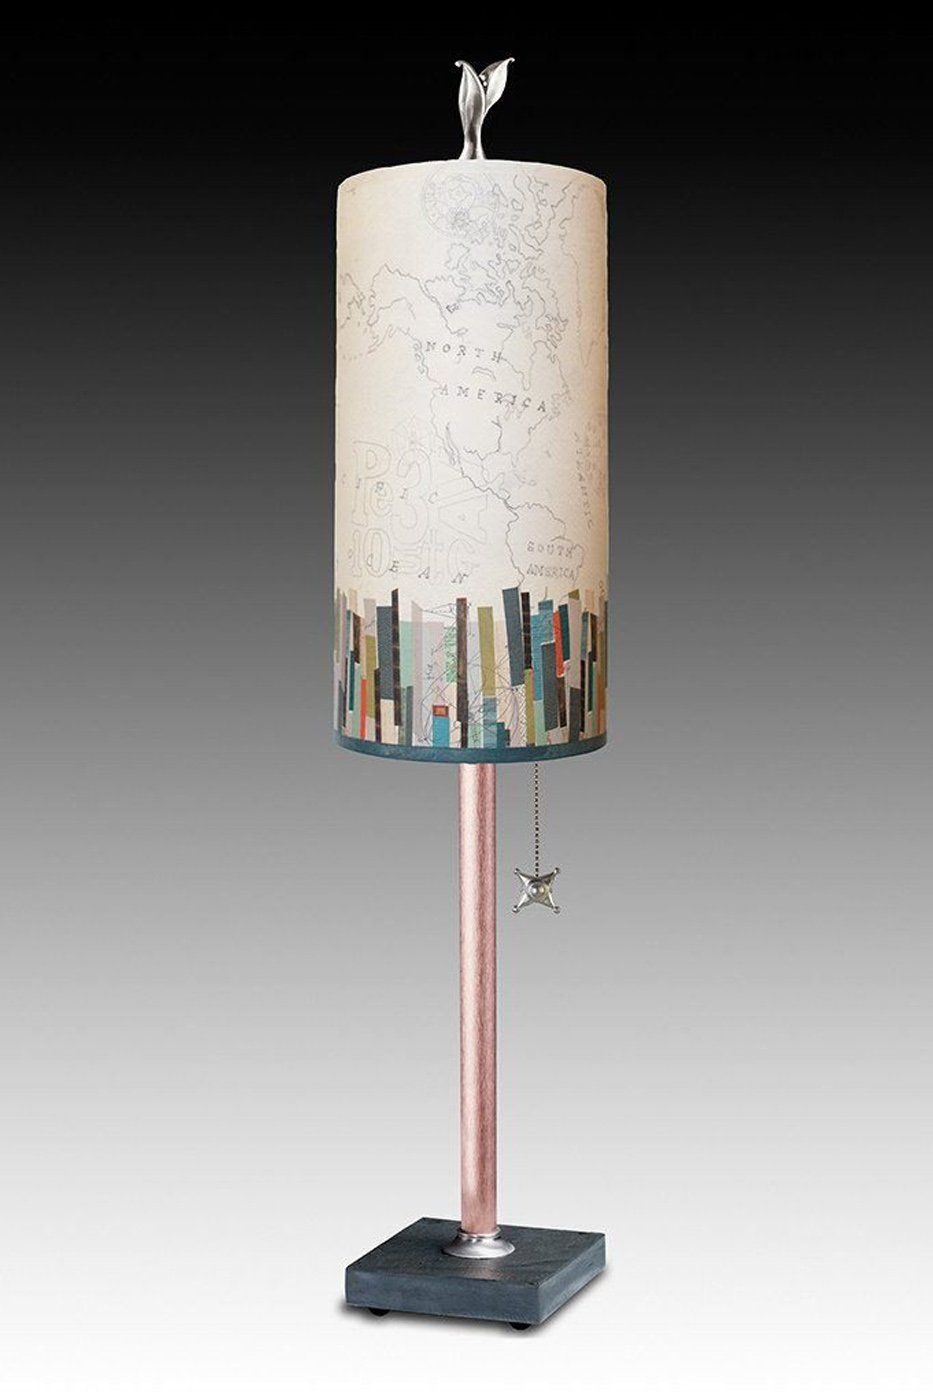 Janna Ugone & Co Table Lamps Copper Table Lamp Small Tube Shade in Papers Edge